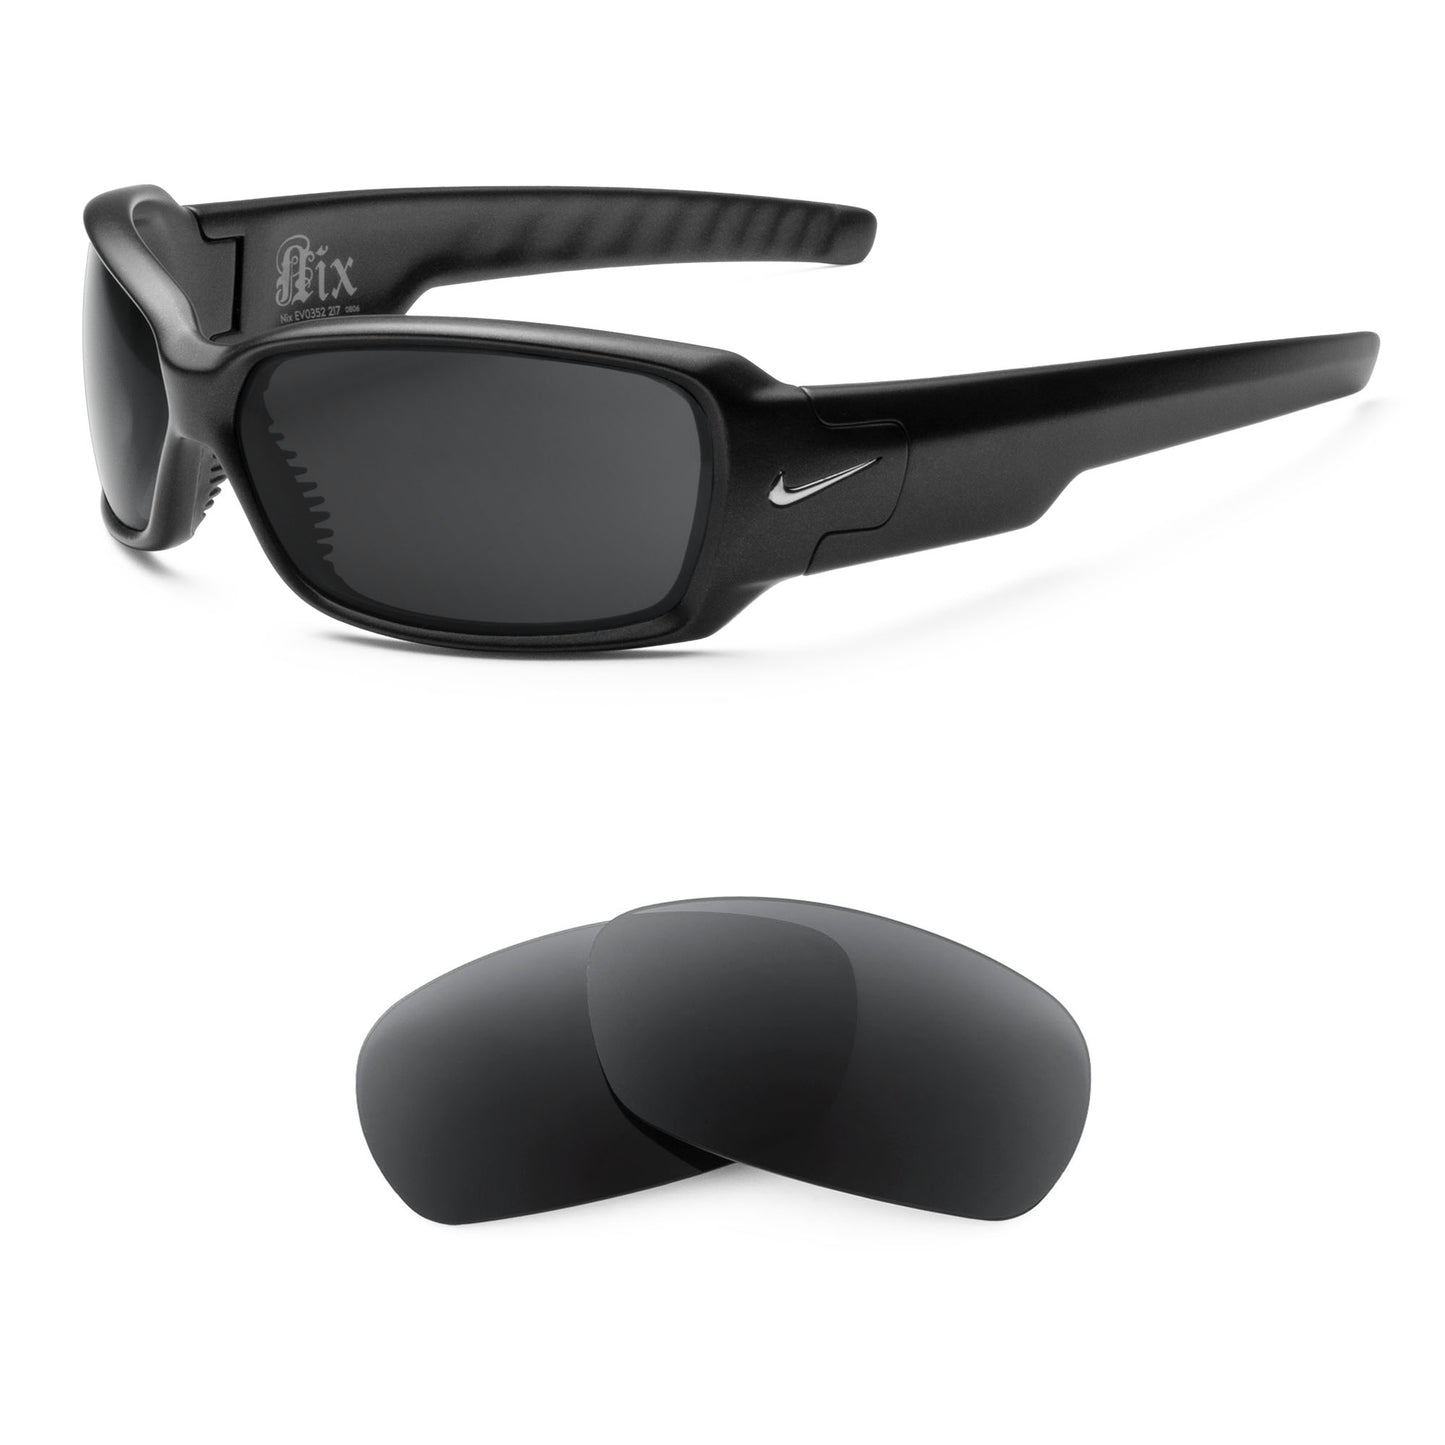 Nike Nix sunglasses with replacement lenses